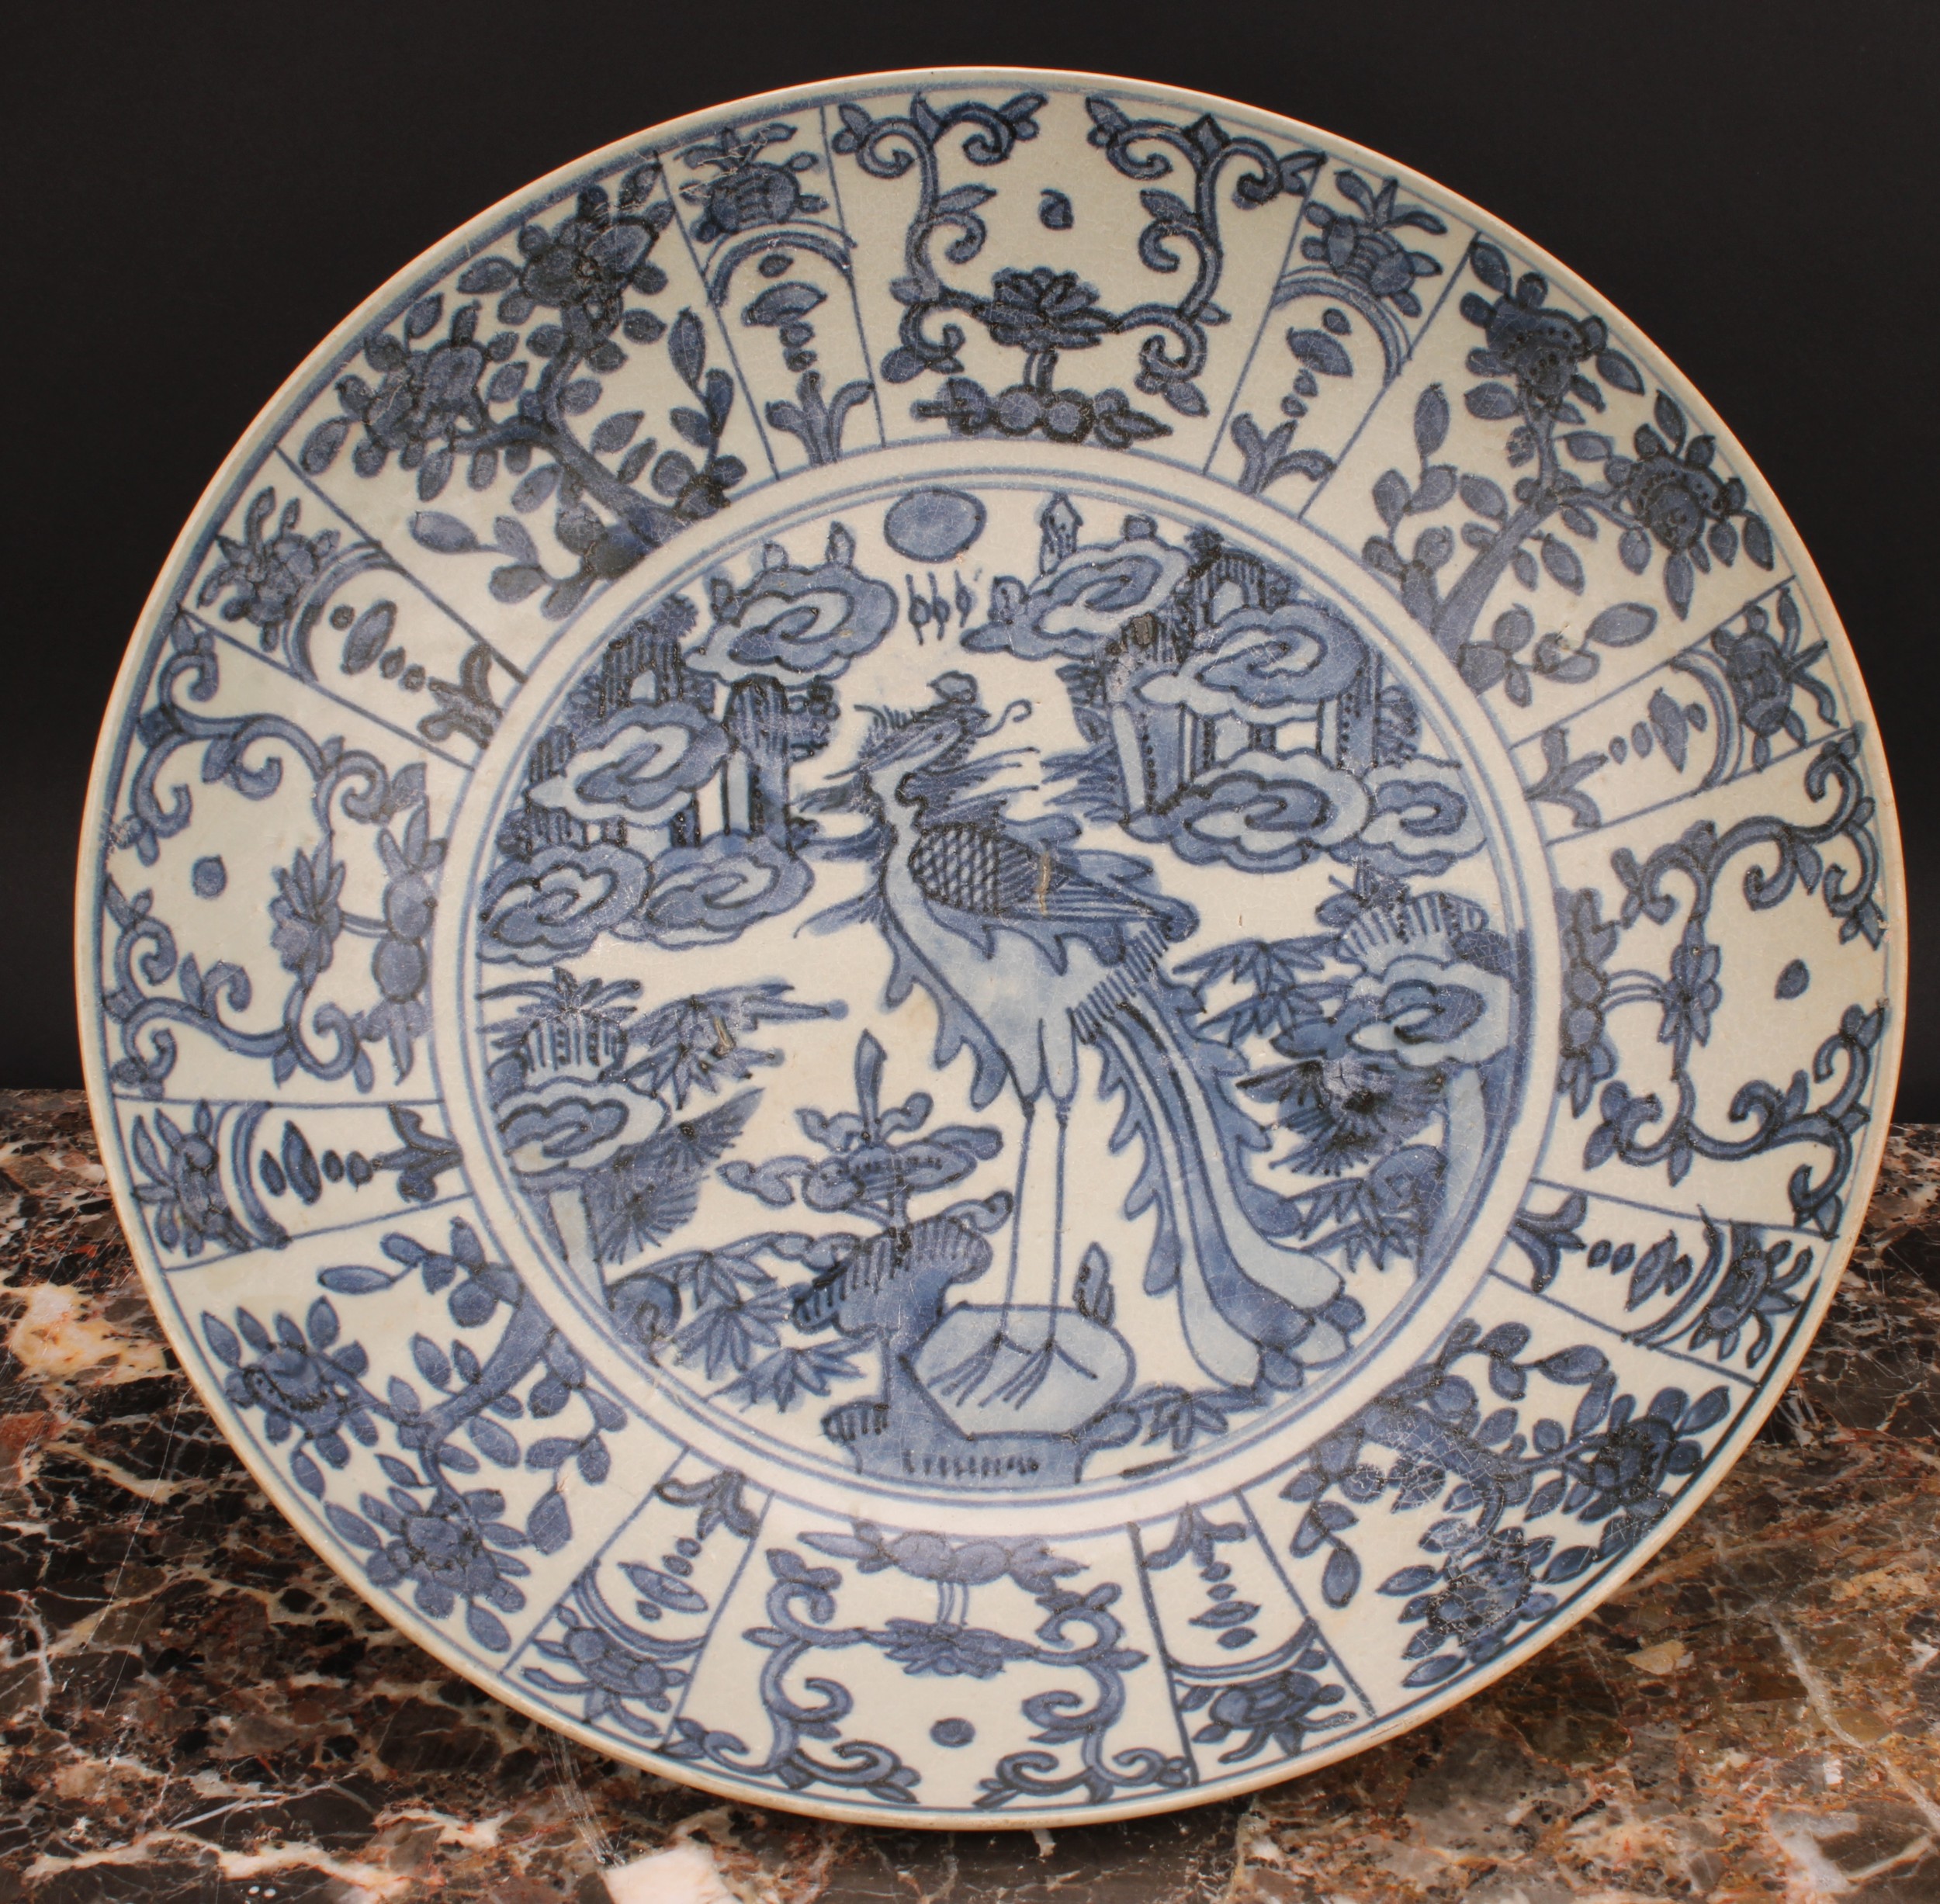 A pair of 17th century Chinese shipwreck porcelain dishes, painted in tones of underglaze blue - Image 2 of 5